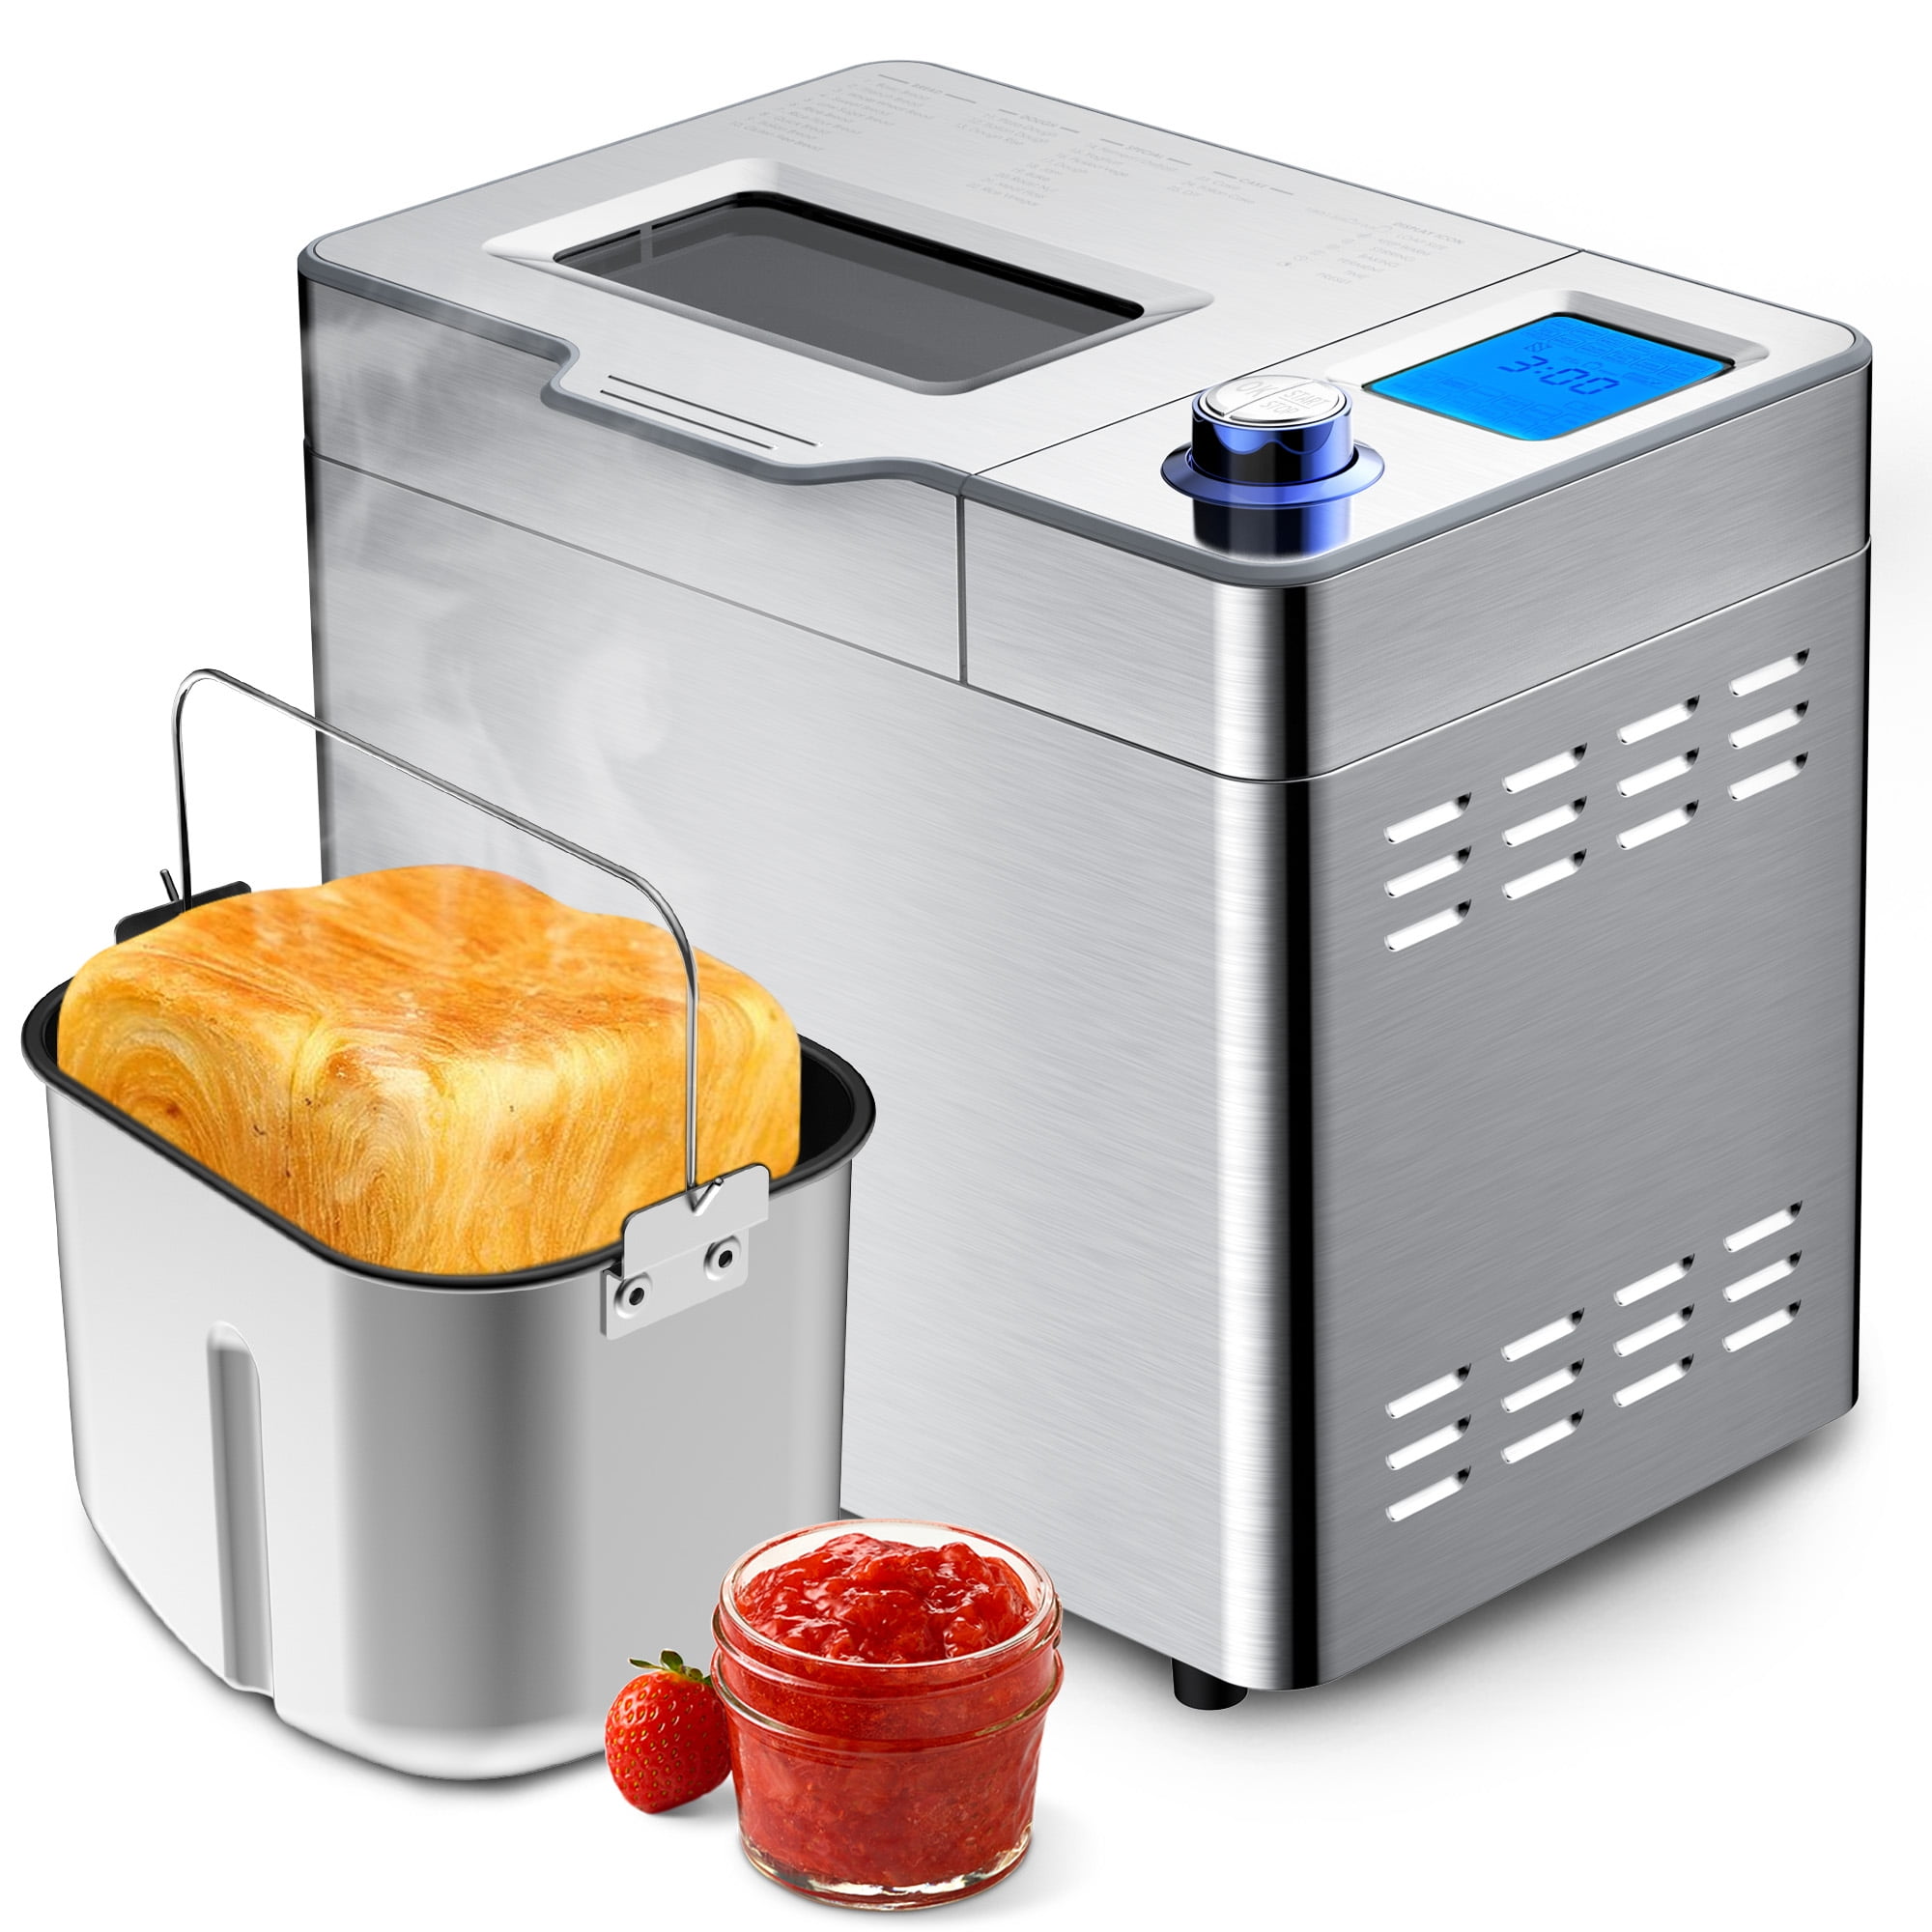 Courant 2 Lbs. Automatic Bread Maker - Stainless Steel, 1 - Fred Meyer